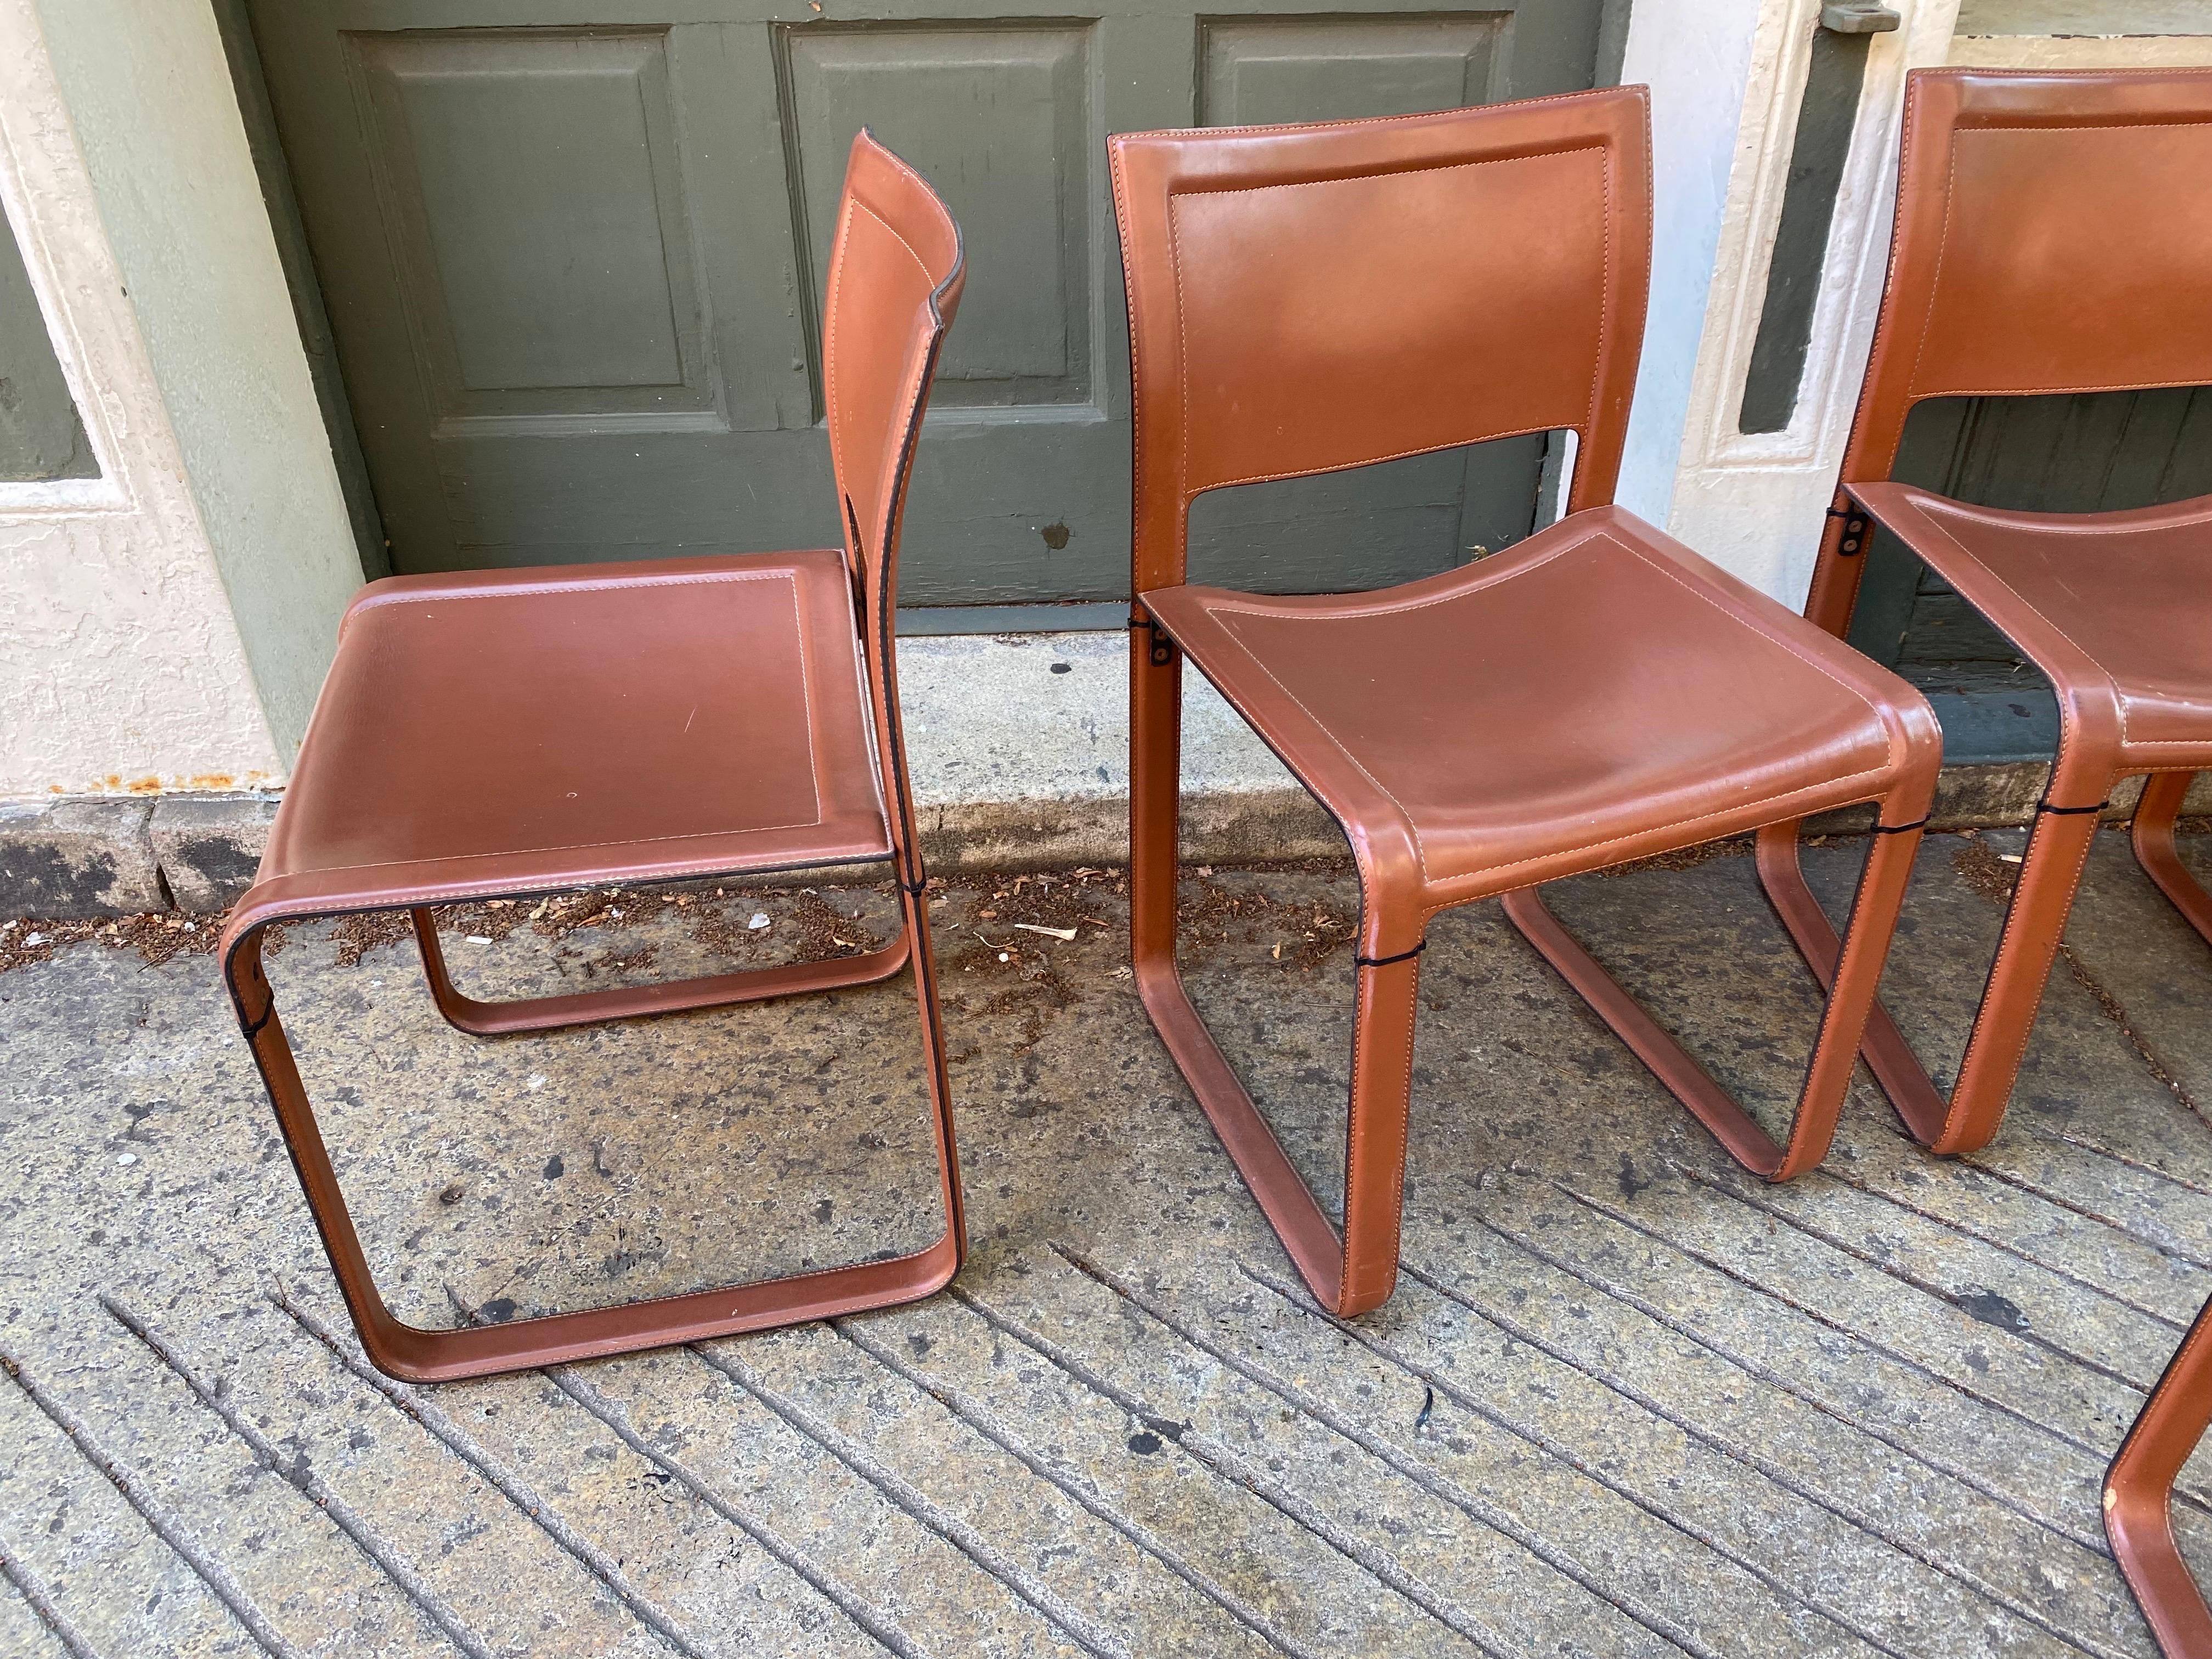 Set of 8 Matteo Grassi leather dining or conference chairs. In nice original condition showing minimal wear. Chairs have great stitch detail and can be placed with all kinds of tables. Simple elegant Italian design!.